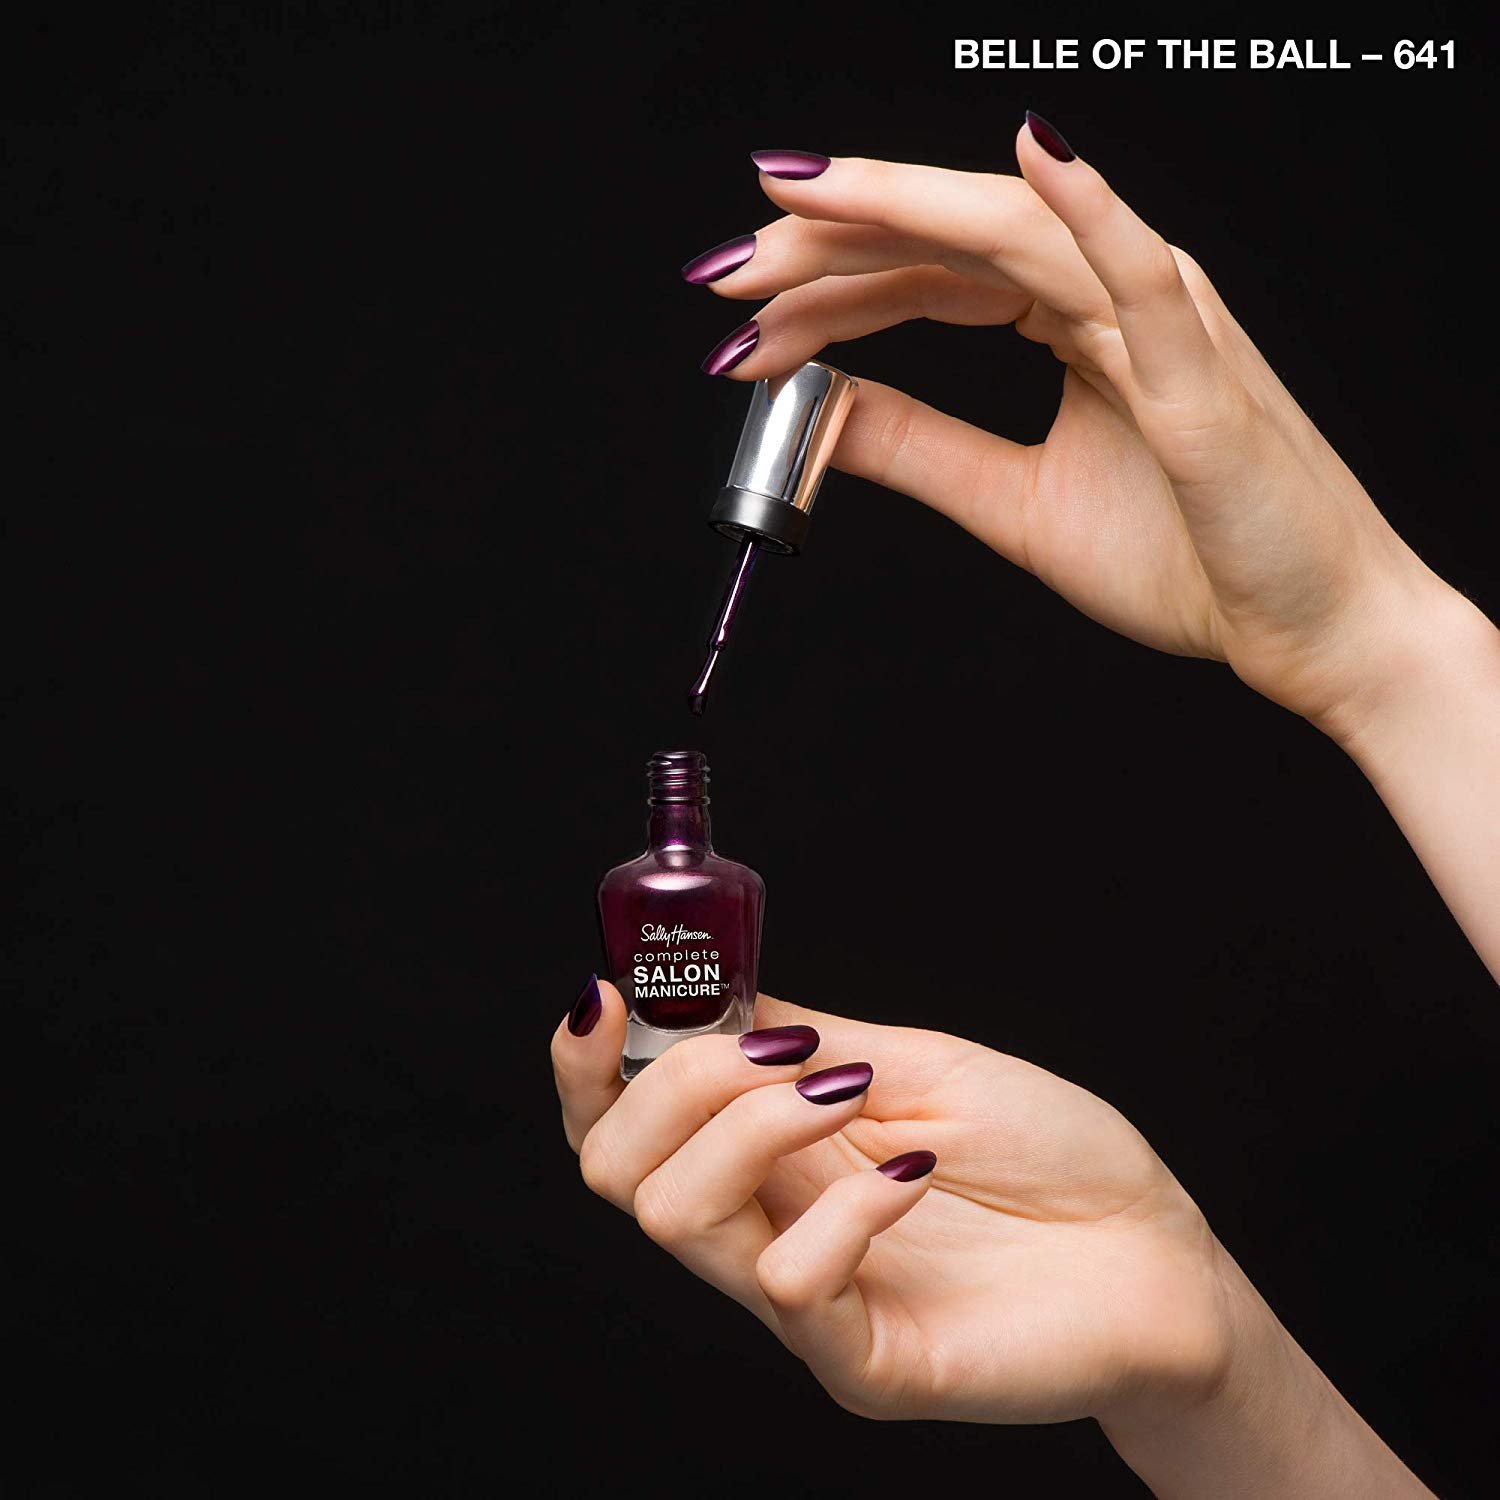 Sally Hansen Complete Salon Manicure Nail Polish, Belle of the Ball - image 2 of 8